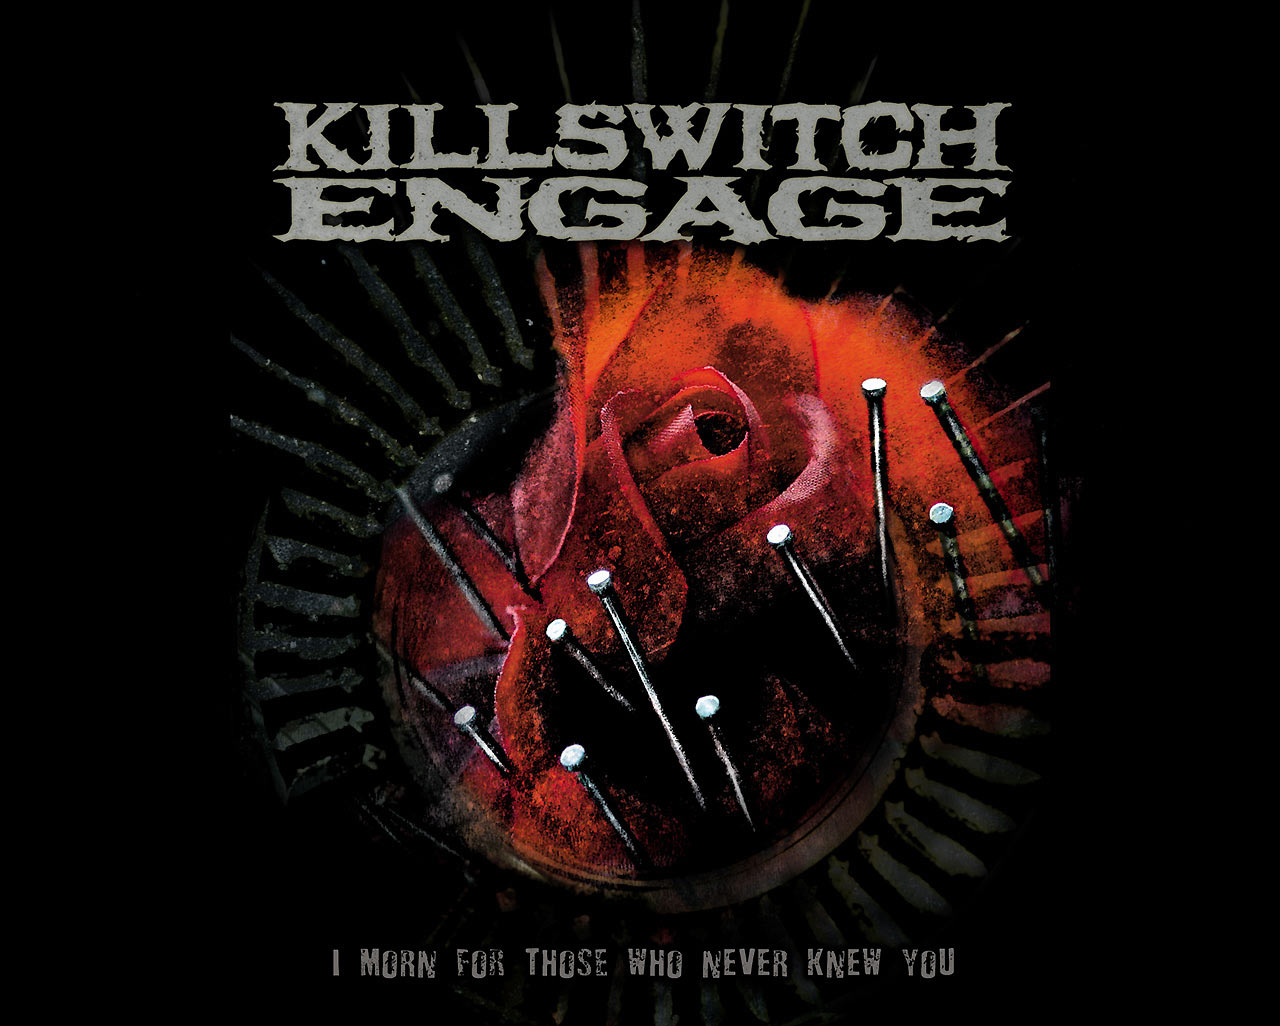 High Definition Killswitch Engage Wallpaper HDq Cover Photos